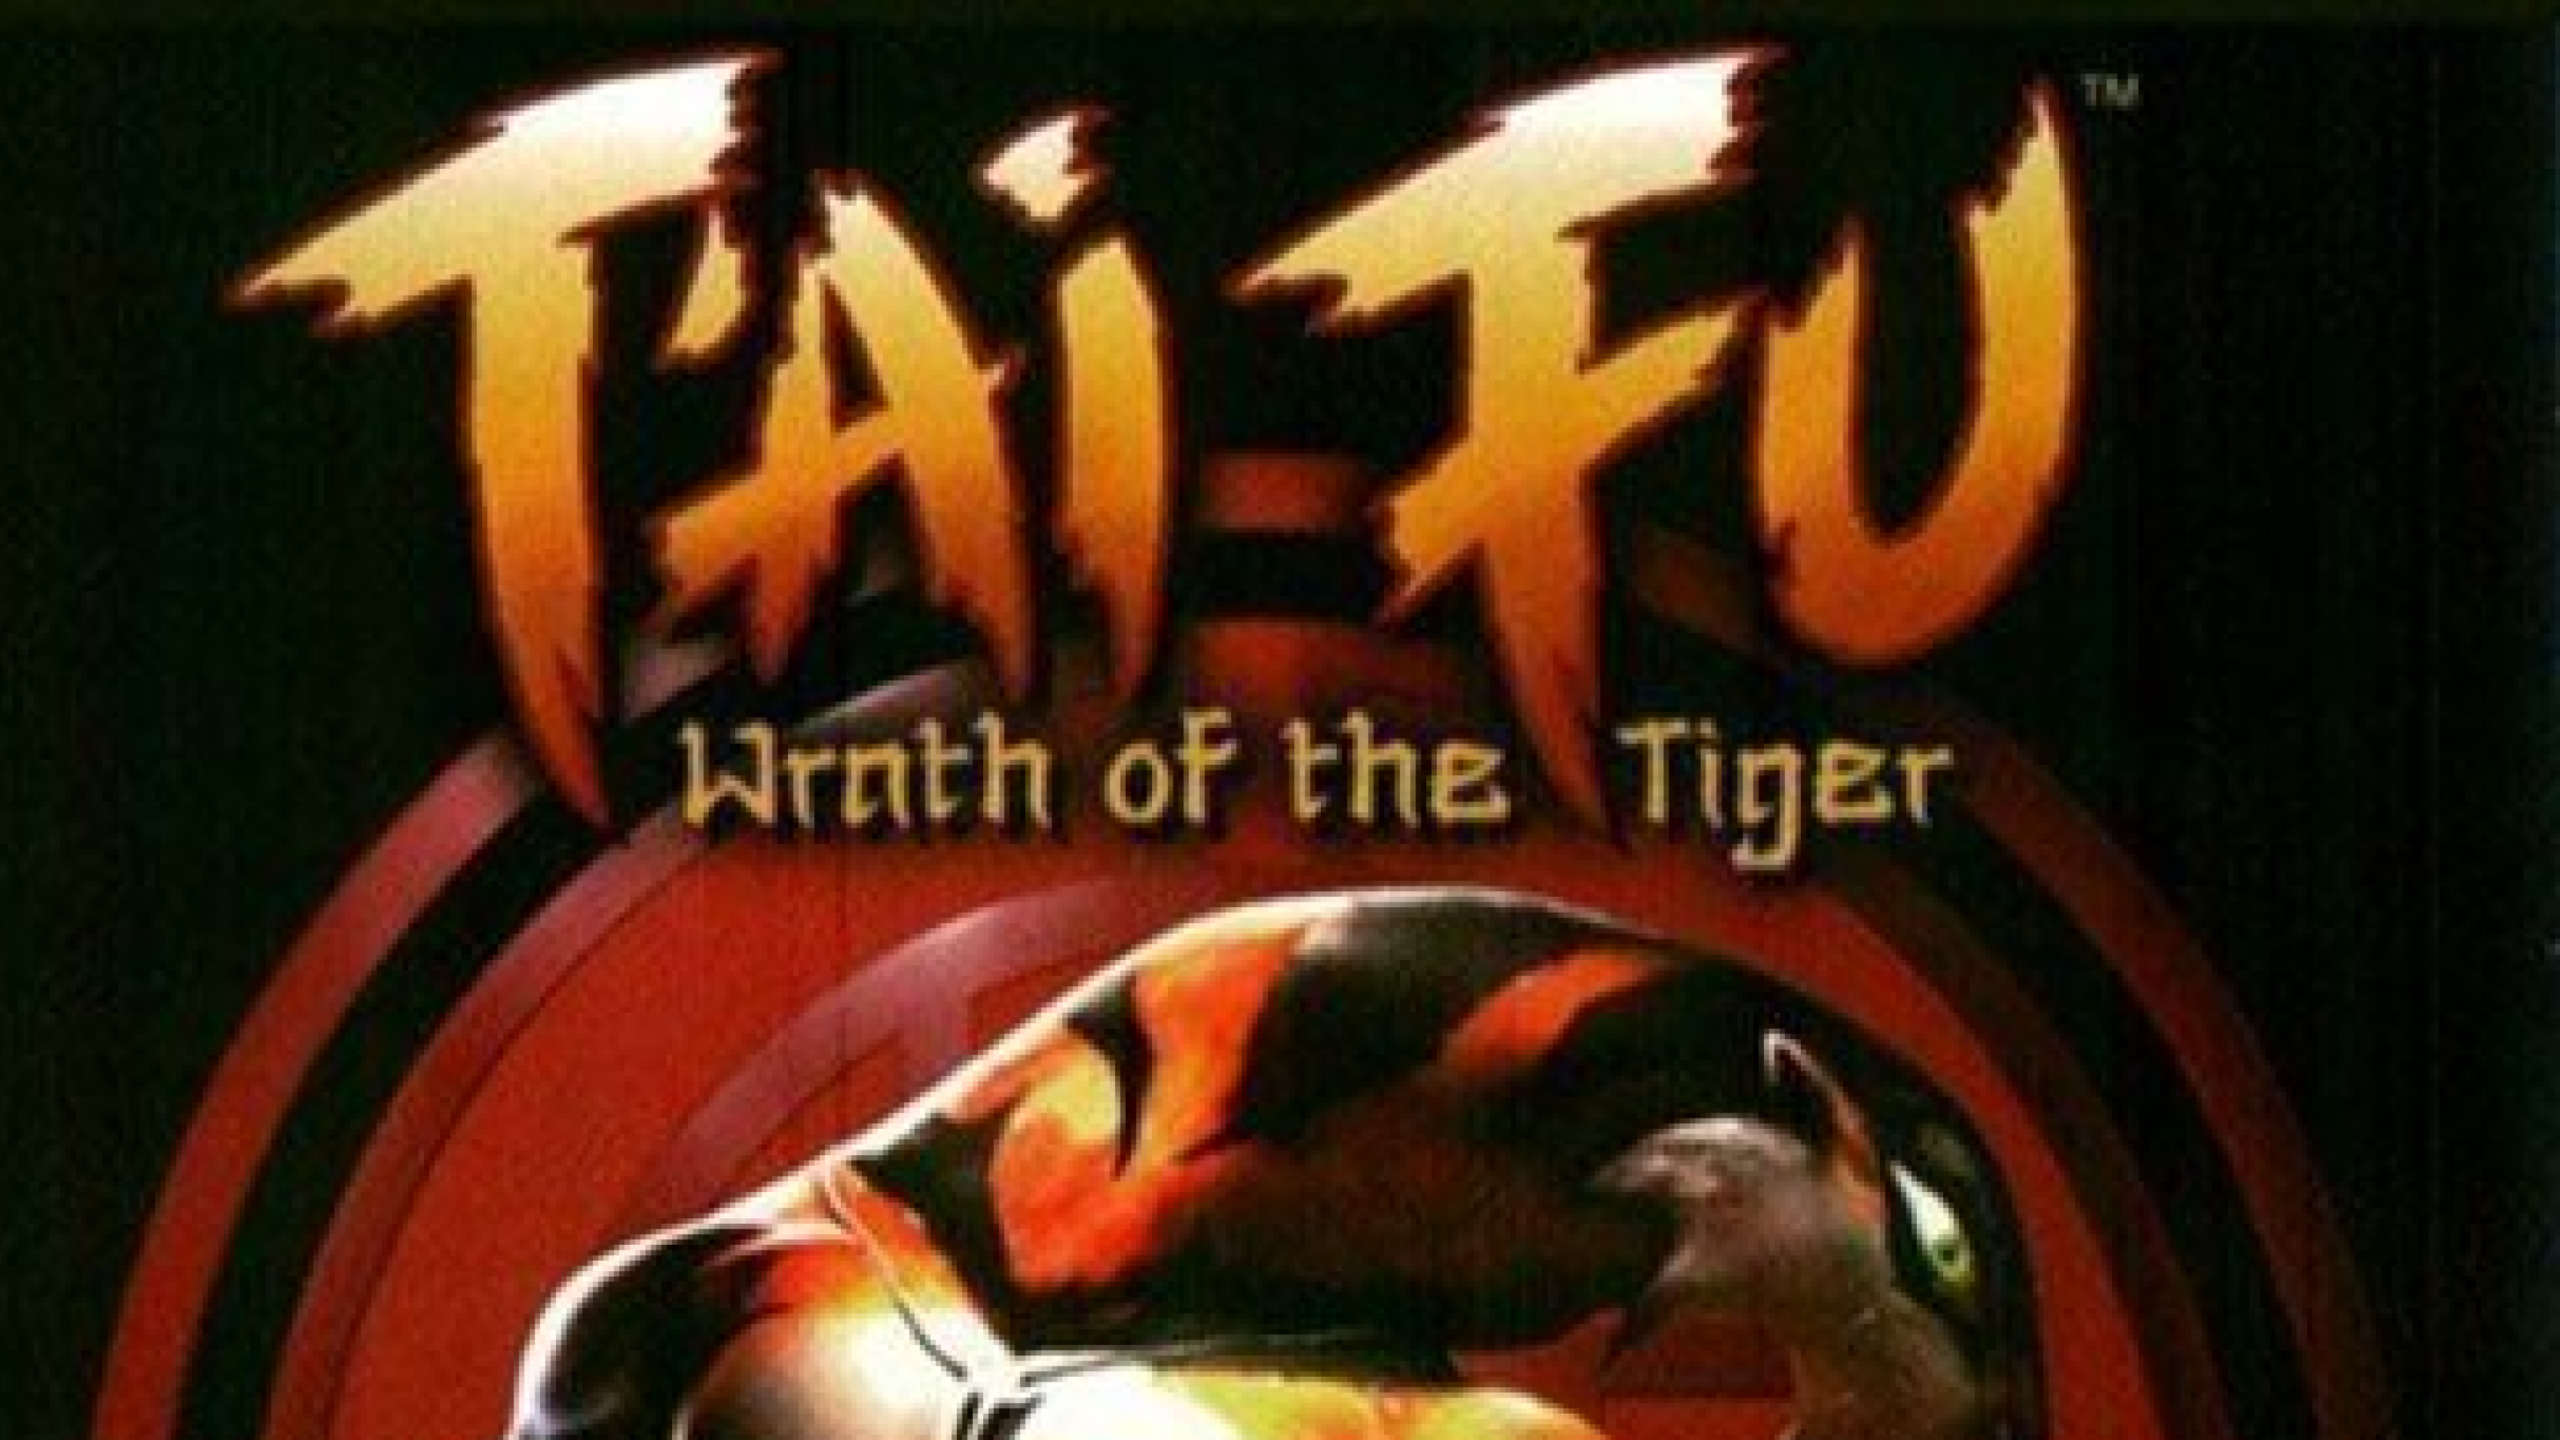 You are currently viewing Better Late Than Never: T’ai Fu: Wrath of the Tiger